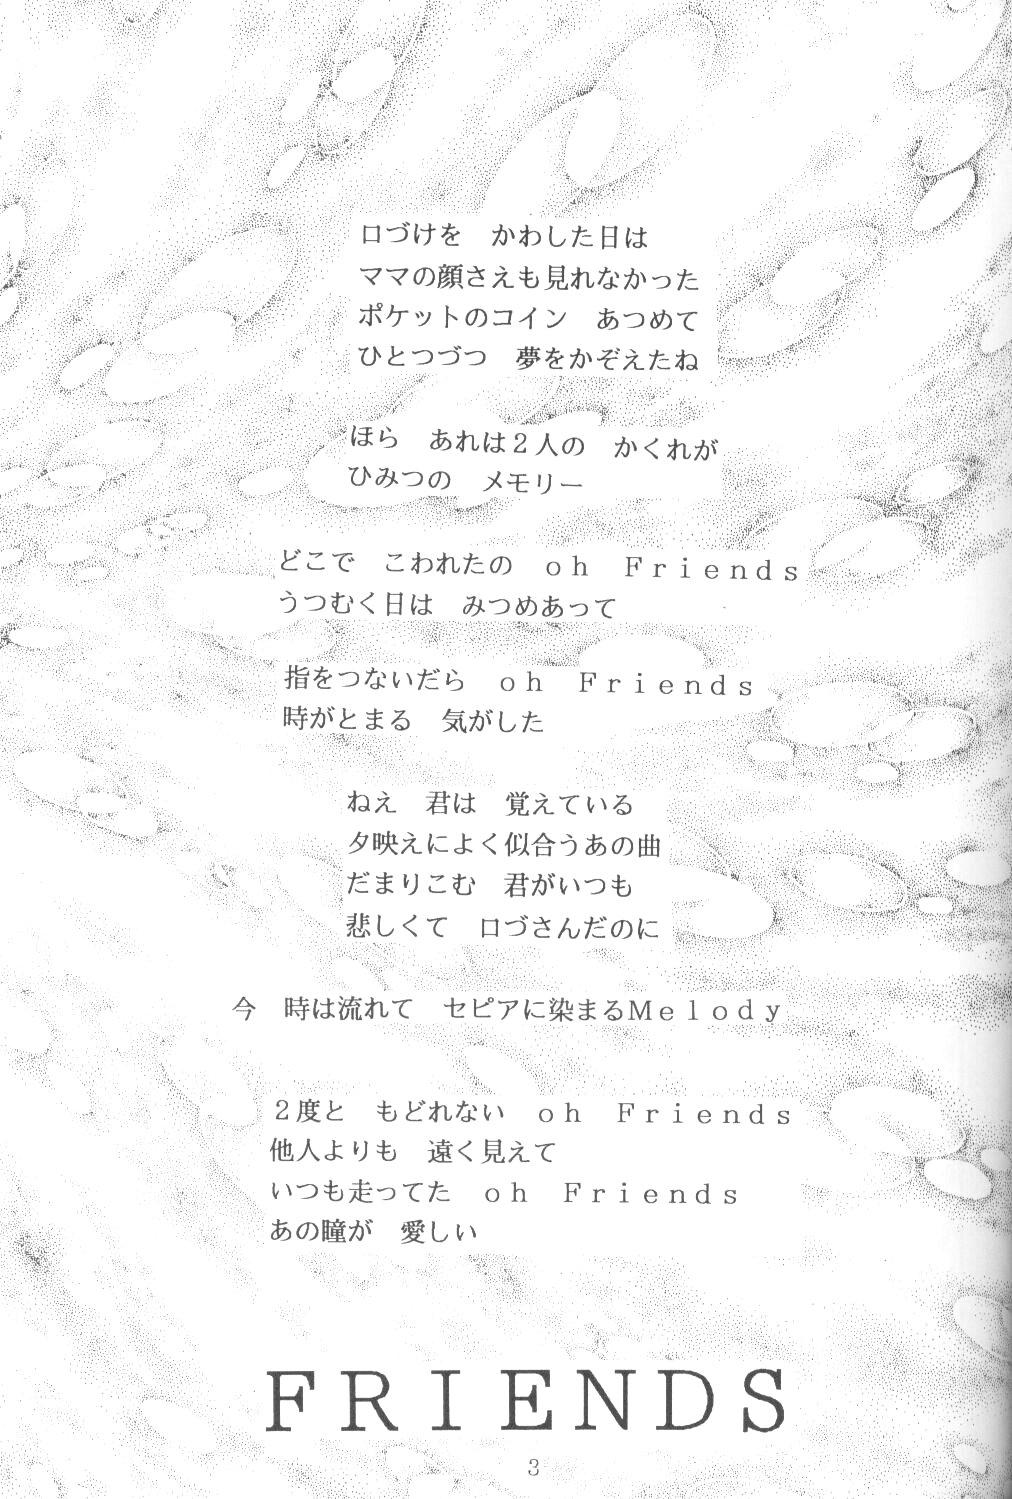 Nice ALIVE AMI LOST - Sailor moon Deflowered - Page 2